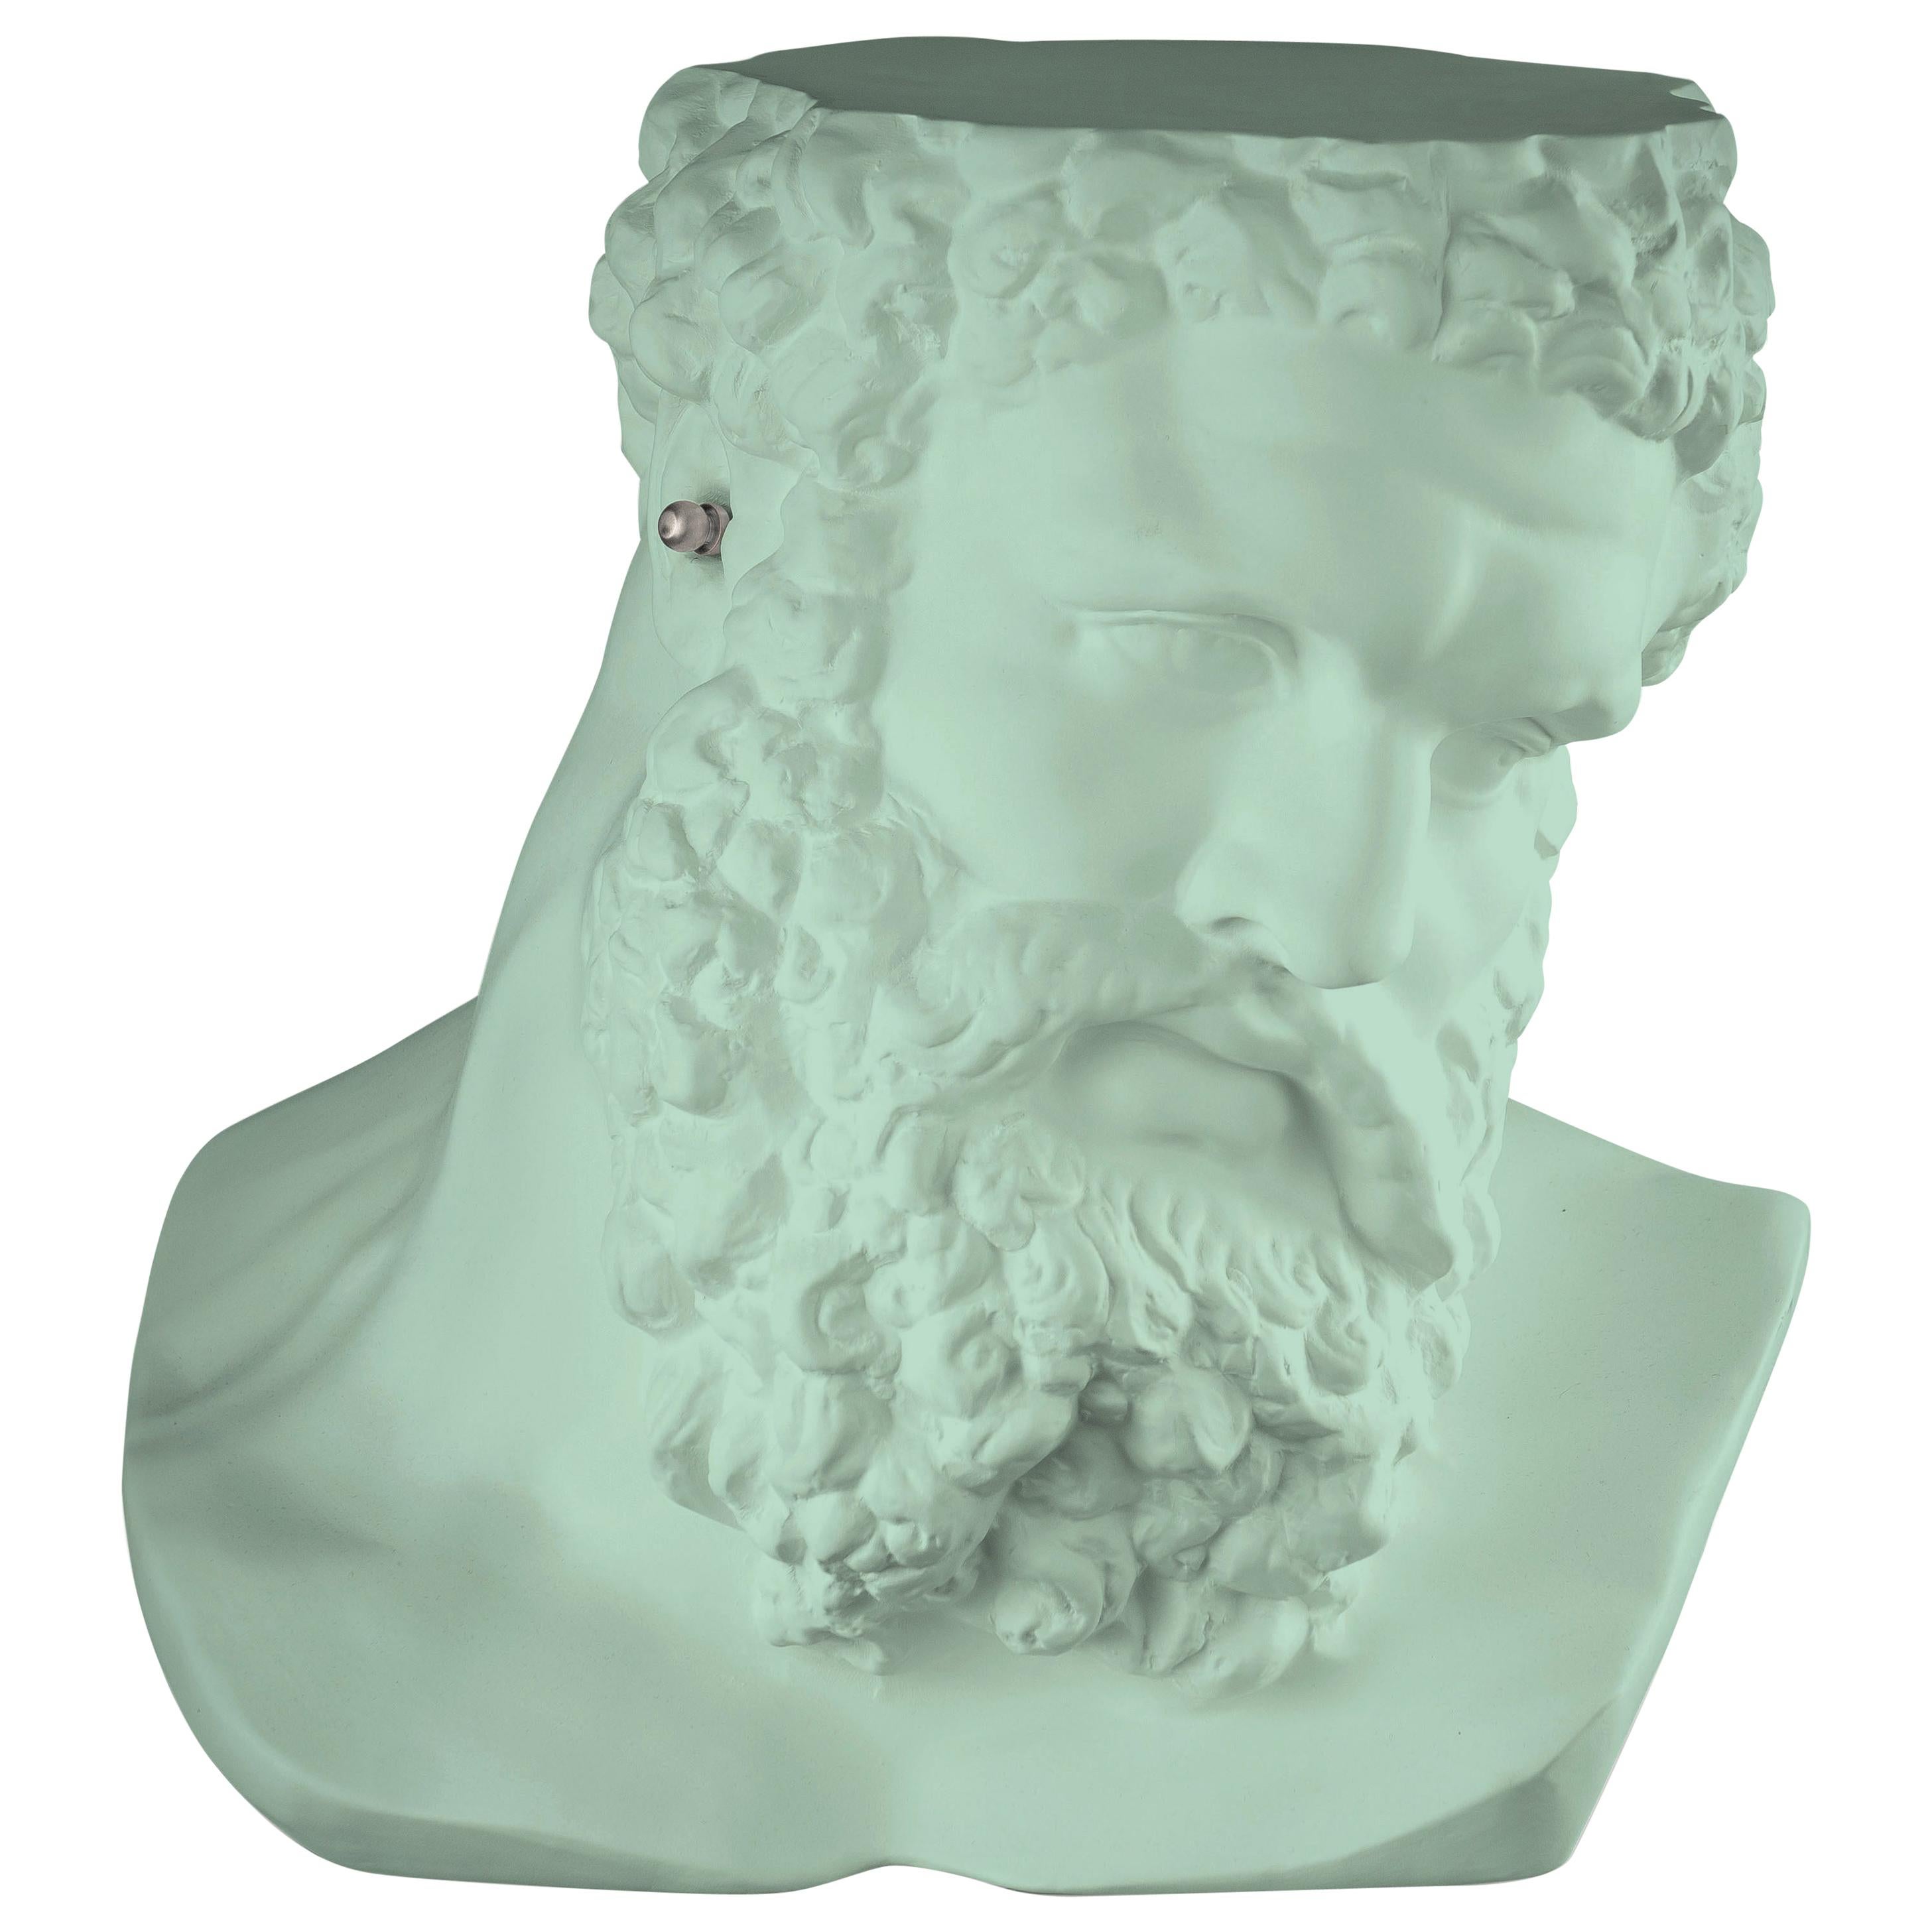 Bust Ercole "Don't Hear", Small Table/Sculpture, Ceramic, Neo Mint Color, Italy For Sale